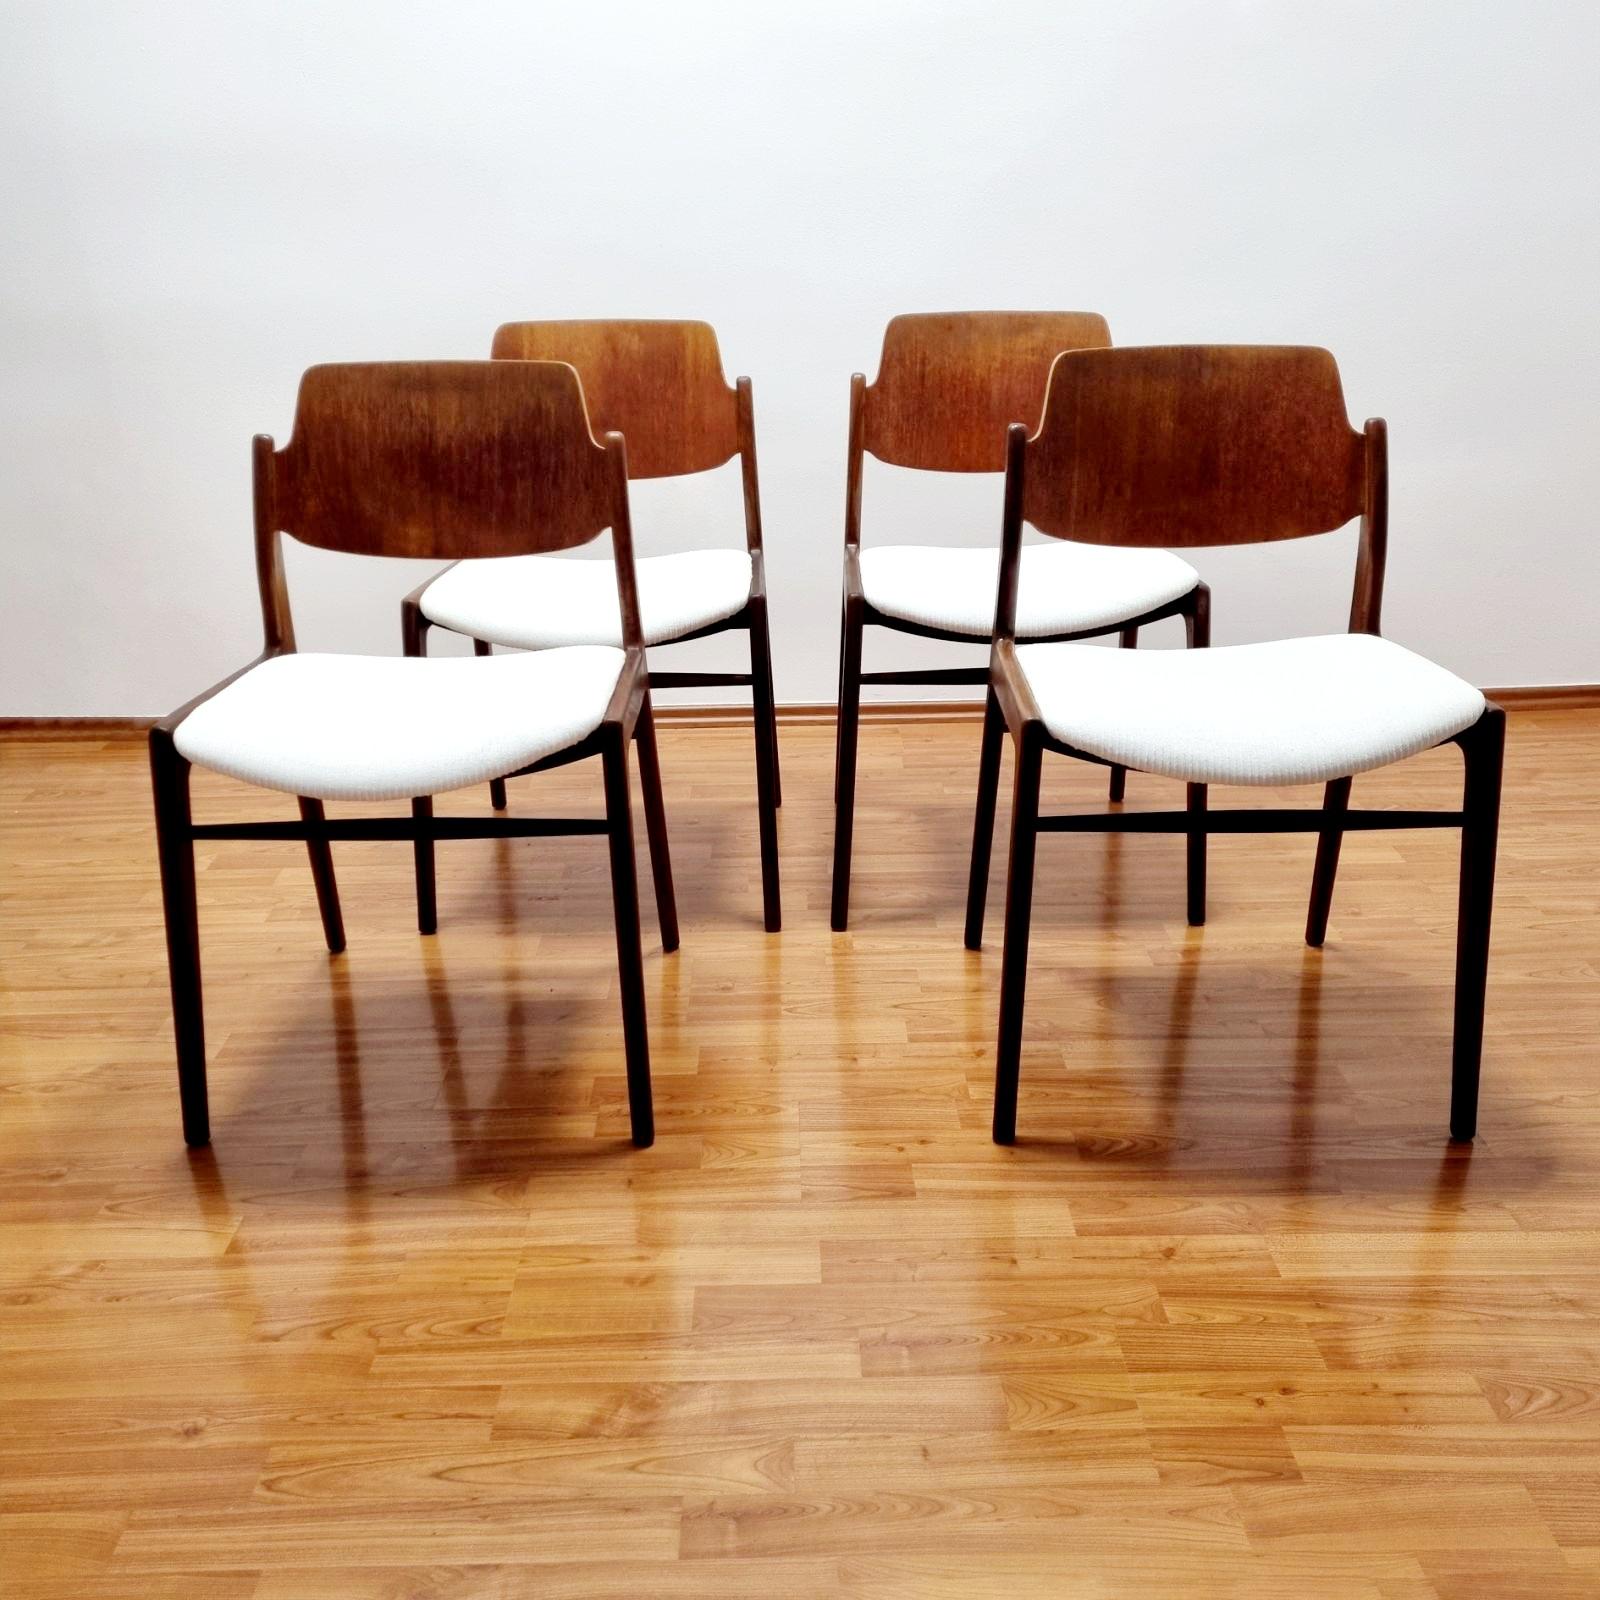 Dining Chairs By Hartmut Lohmeyer For Wilkhahn, Germany 60s For Sale 6